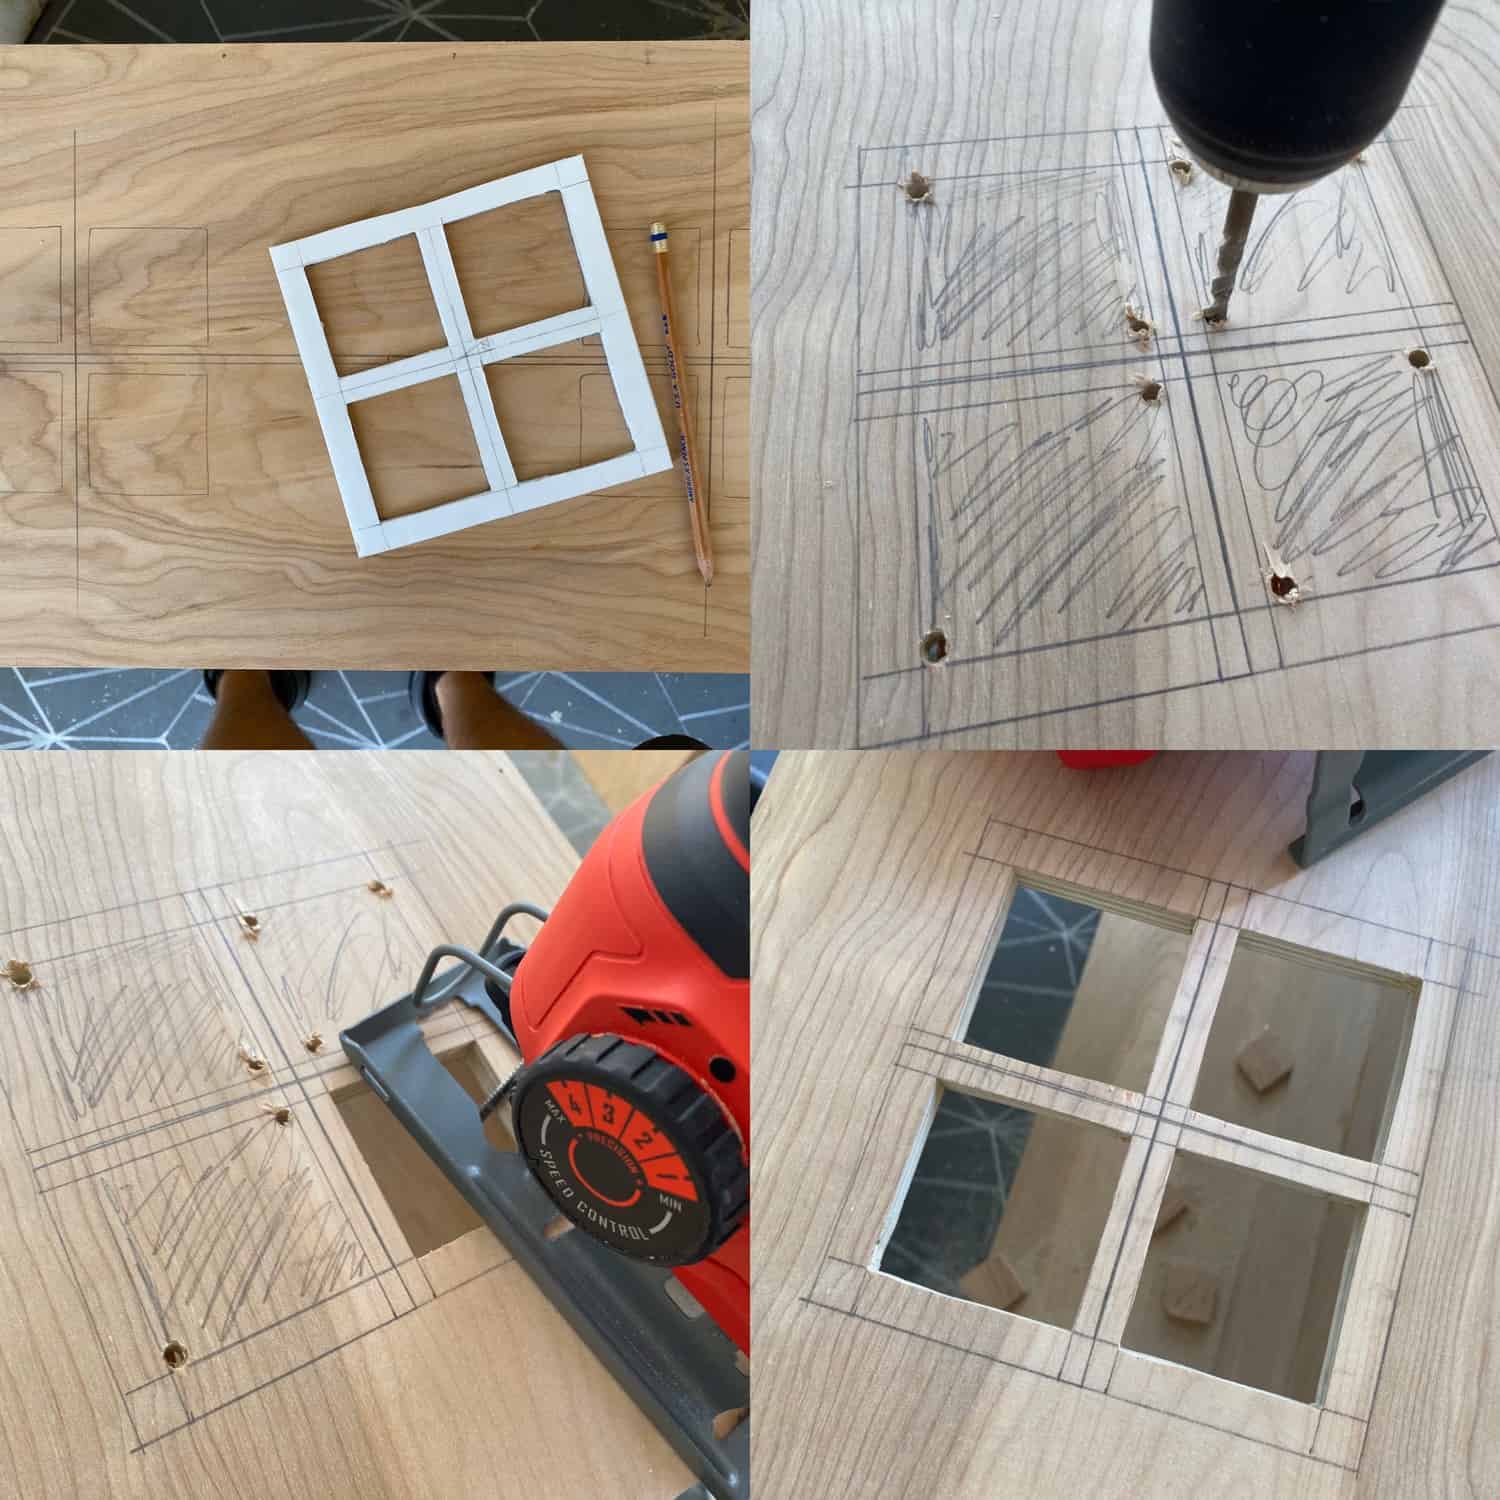 4 photos of the process of outling, drilling, and cutting the window out on plywood